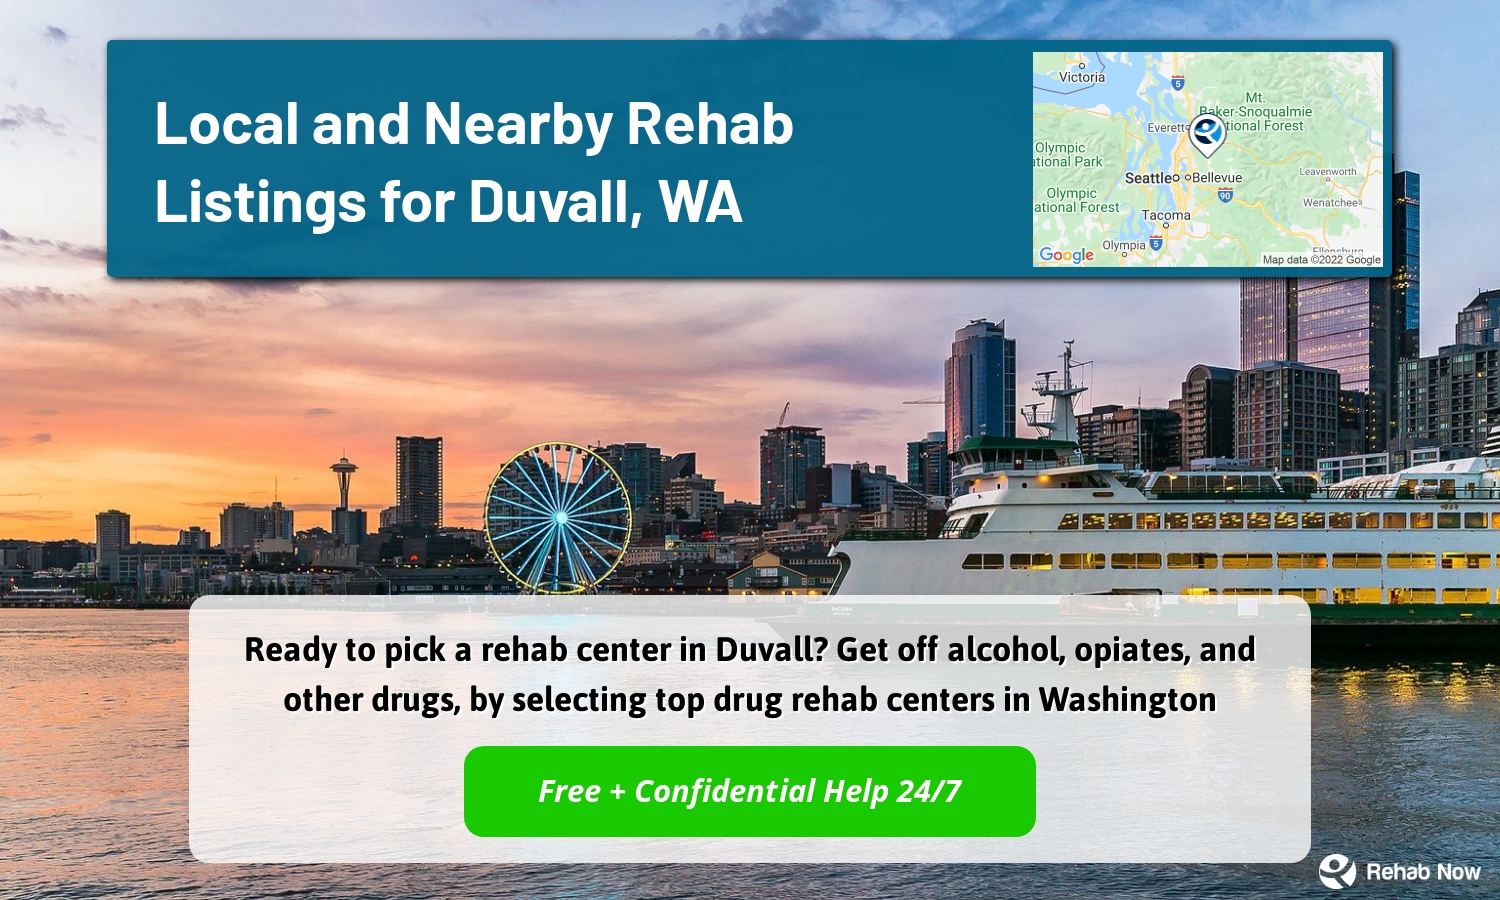 Ready to pick a rehab center in Duvall? Get off alcohol, opiates, and other drugs, by selecting top drug rehab centers in Washington